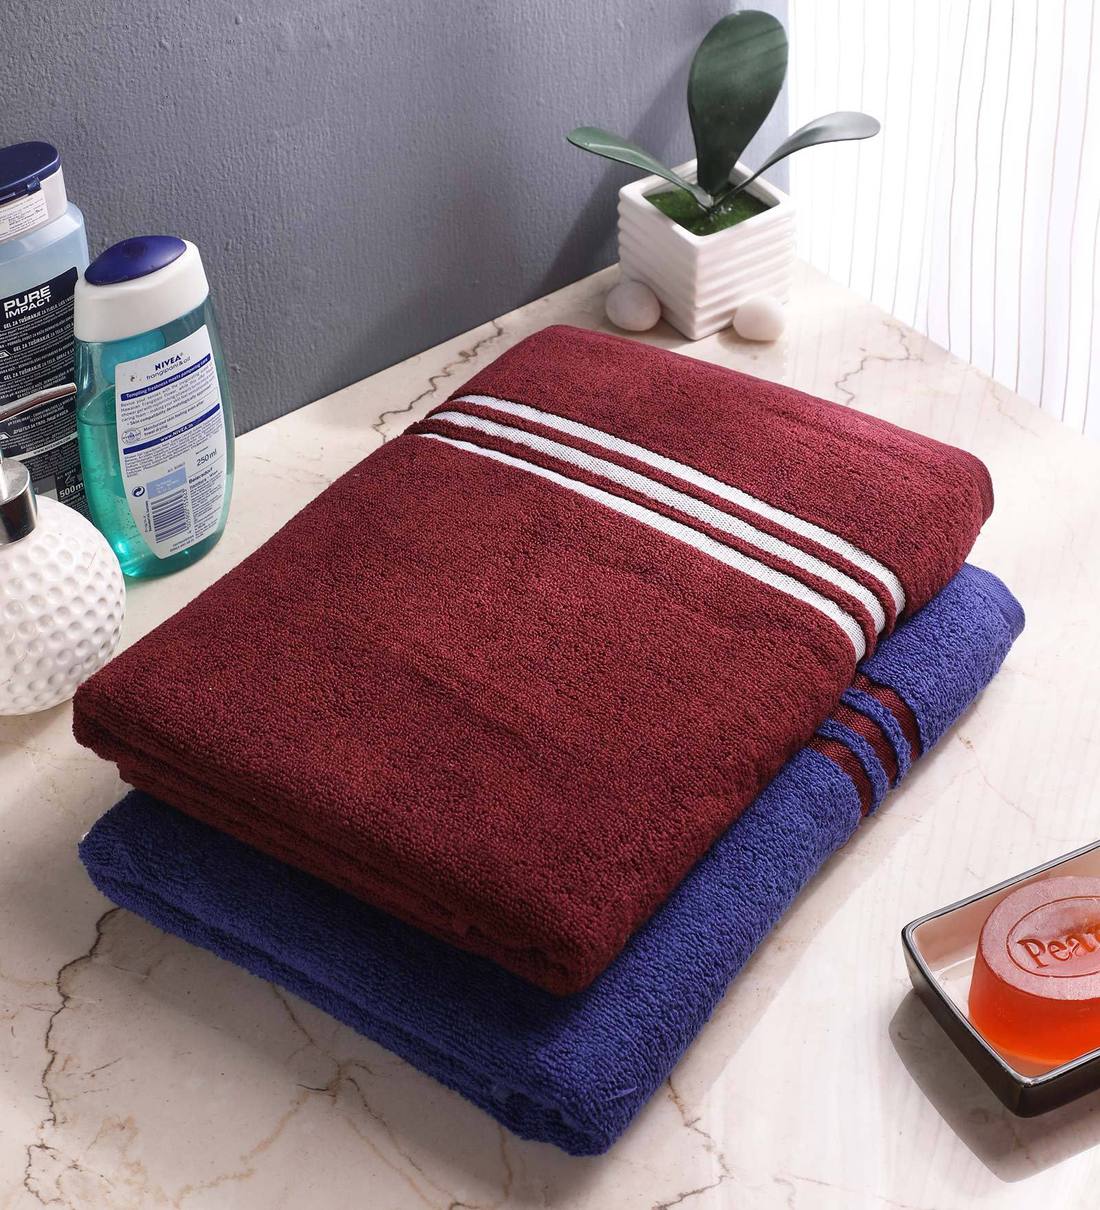 blue and brown bath towels